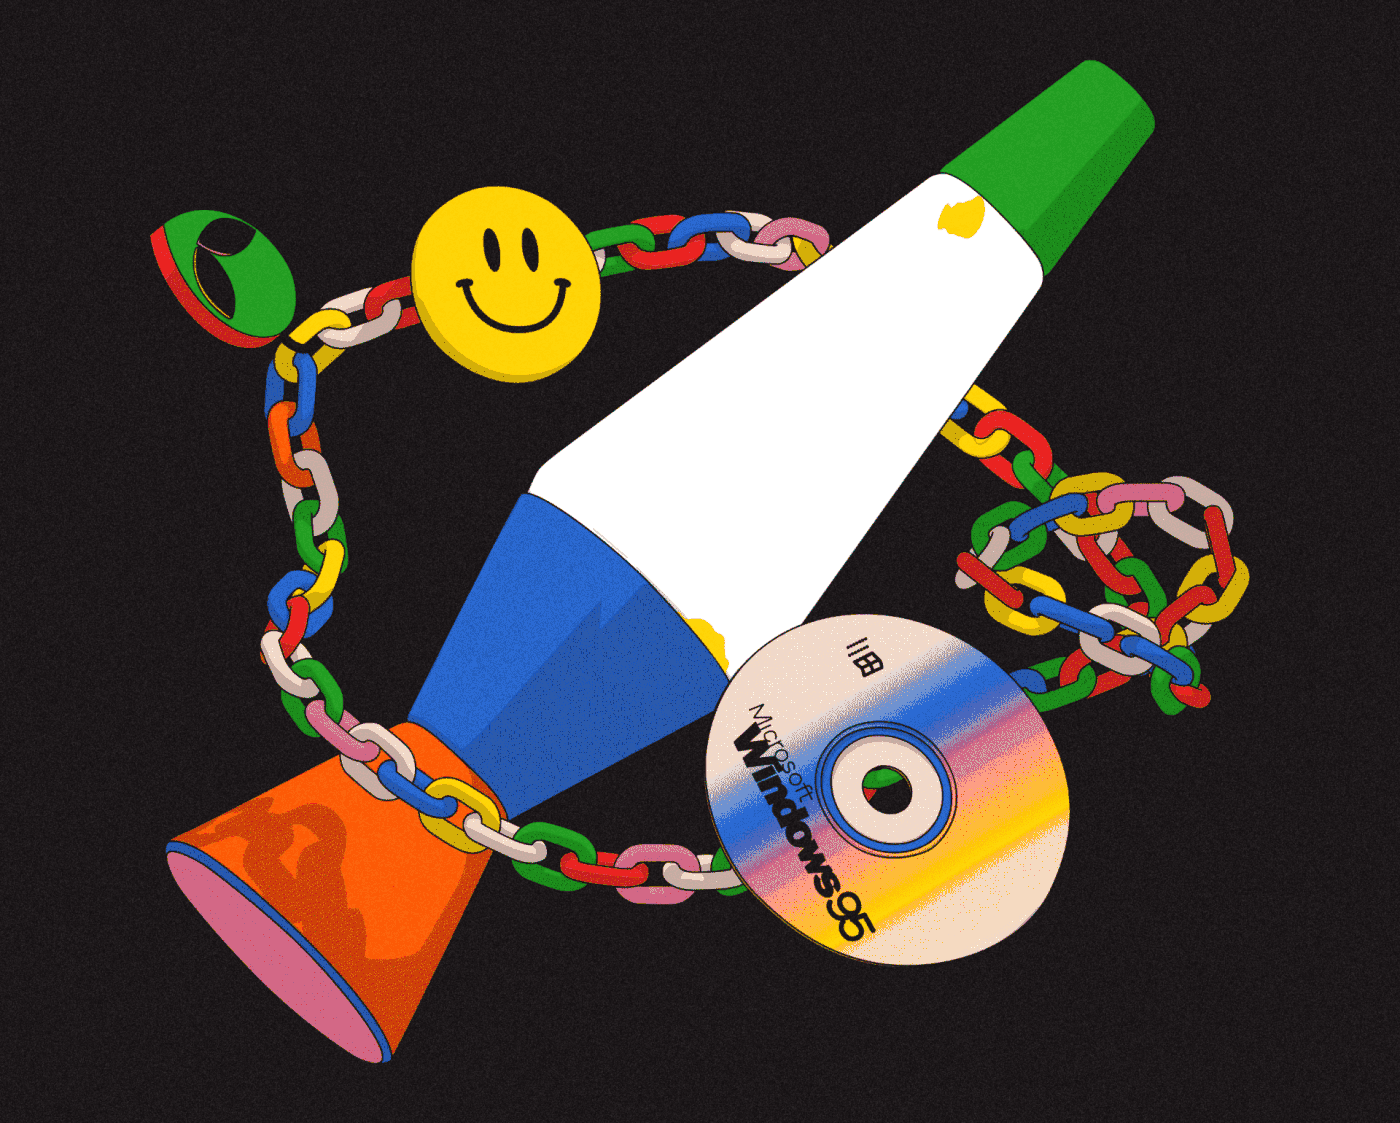 Lavalamp 90's illustration and motion graphic animation cd smiley face and chains in bright colors.